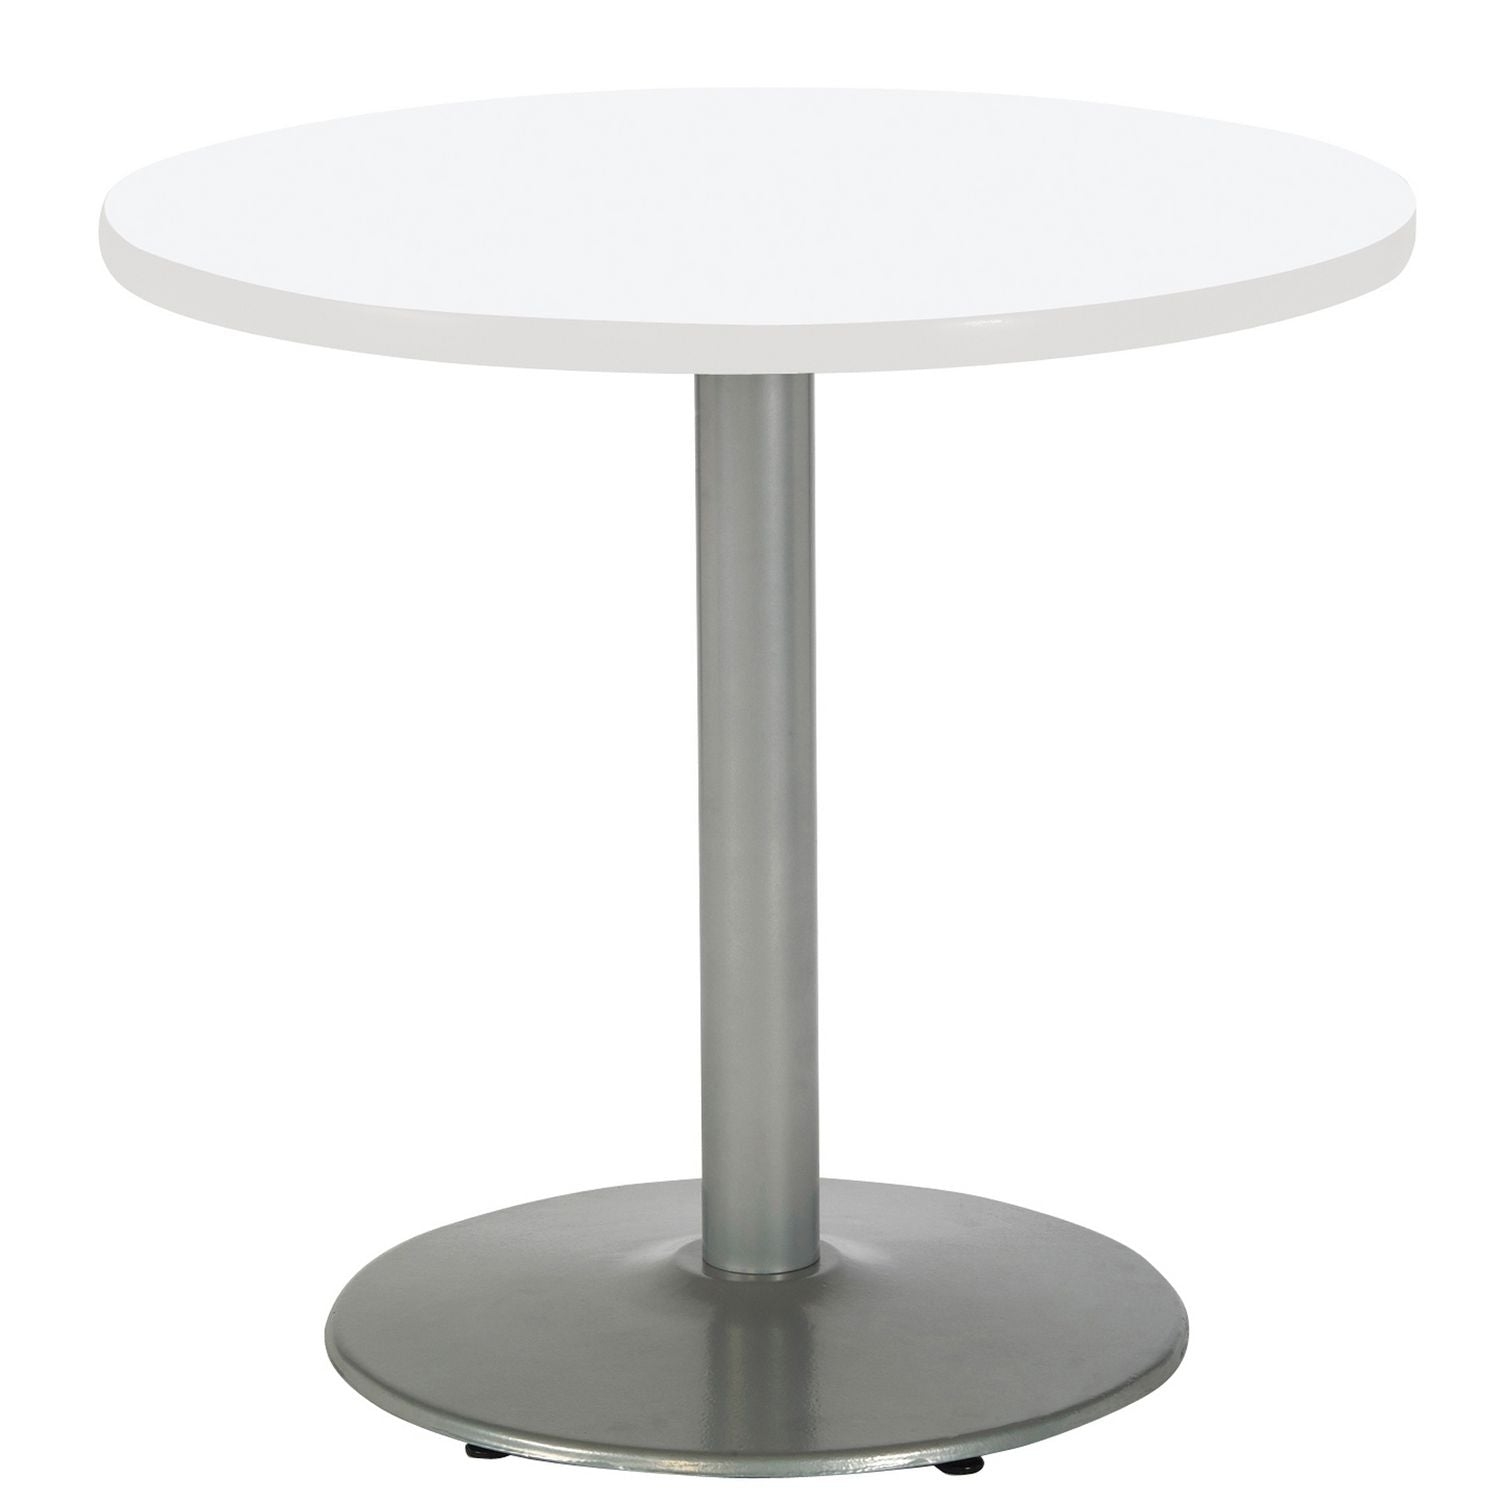 pedestal-table-with-four-coral-kool-series-chairs-round-36-dia-x-29h-designer-white-ships-in-4-6-business-days_kfi811774036764 - 2